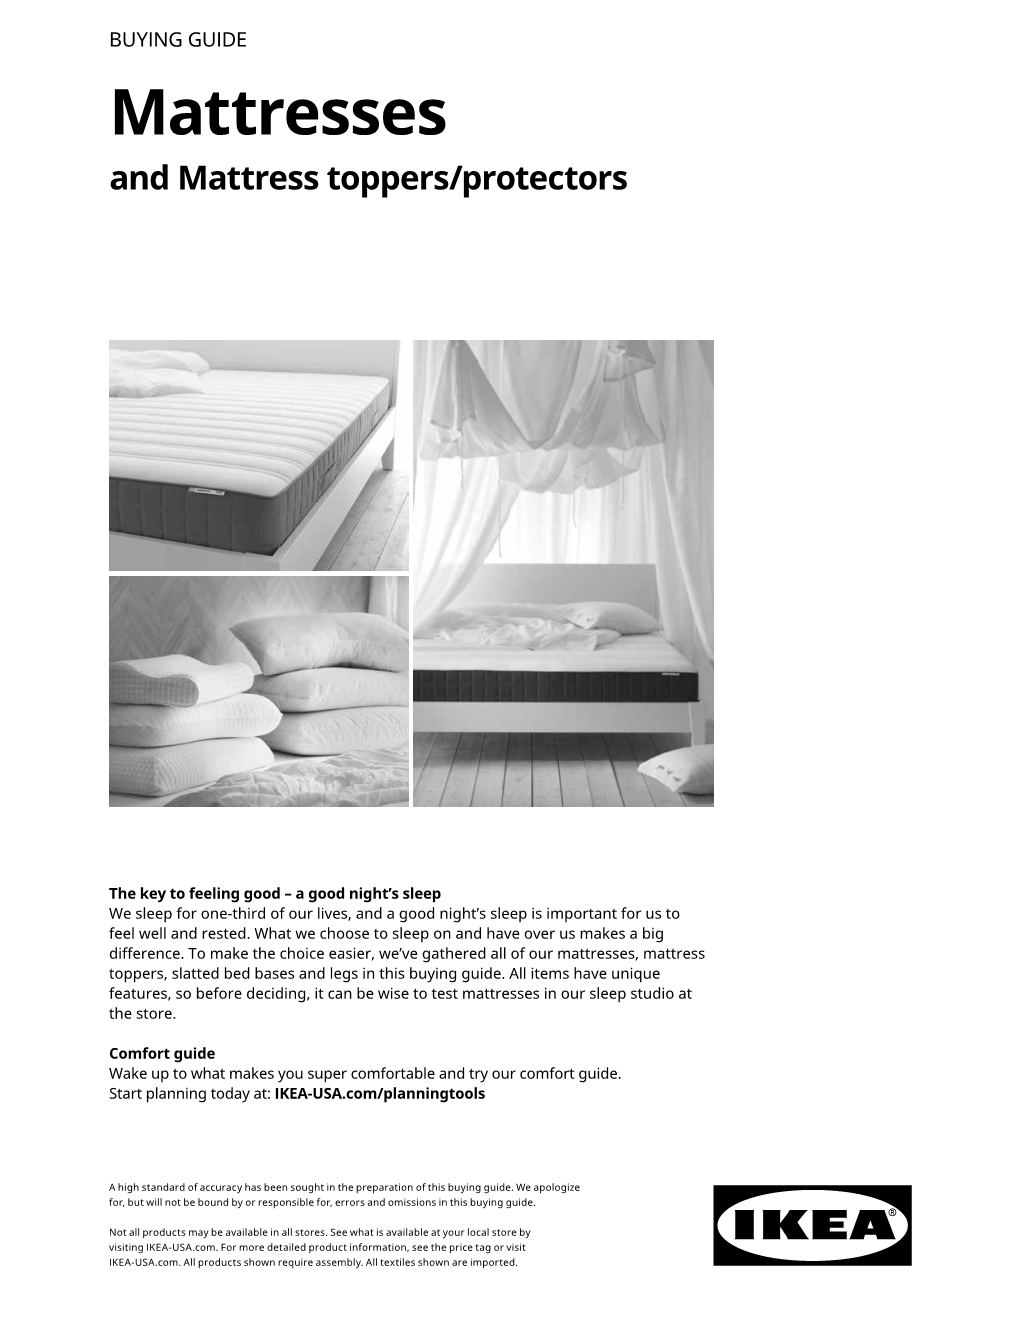 Mattresses and Mattress Toppers/Protectors